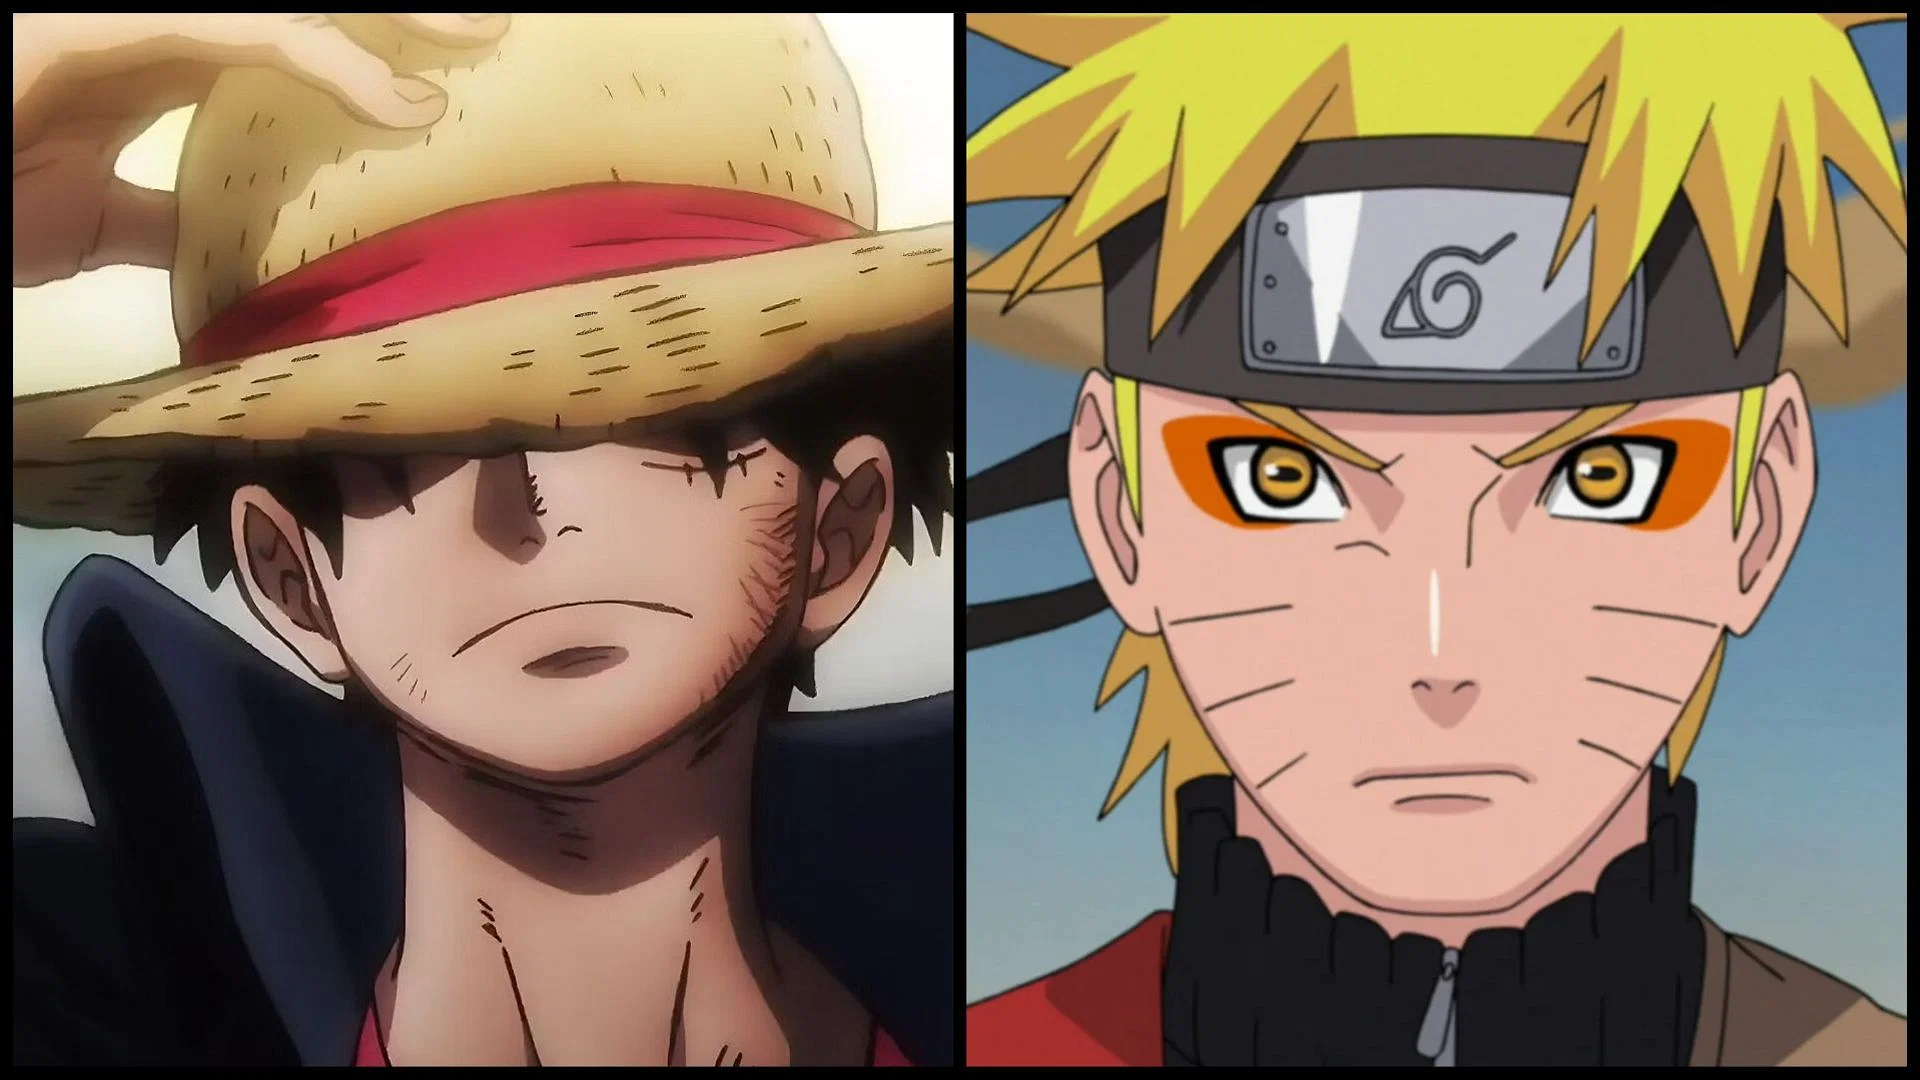 Ultimate Showdown Why Fans Love Naruto and One Piece in the Anime World